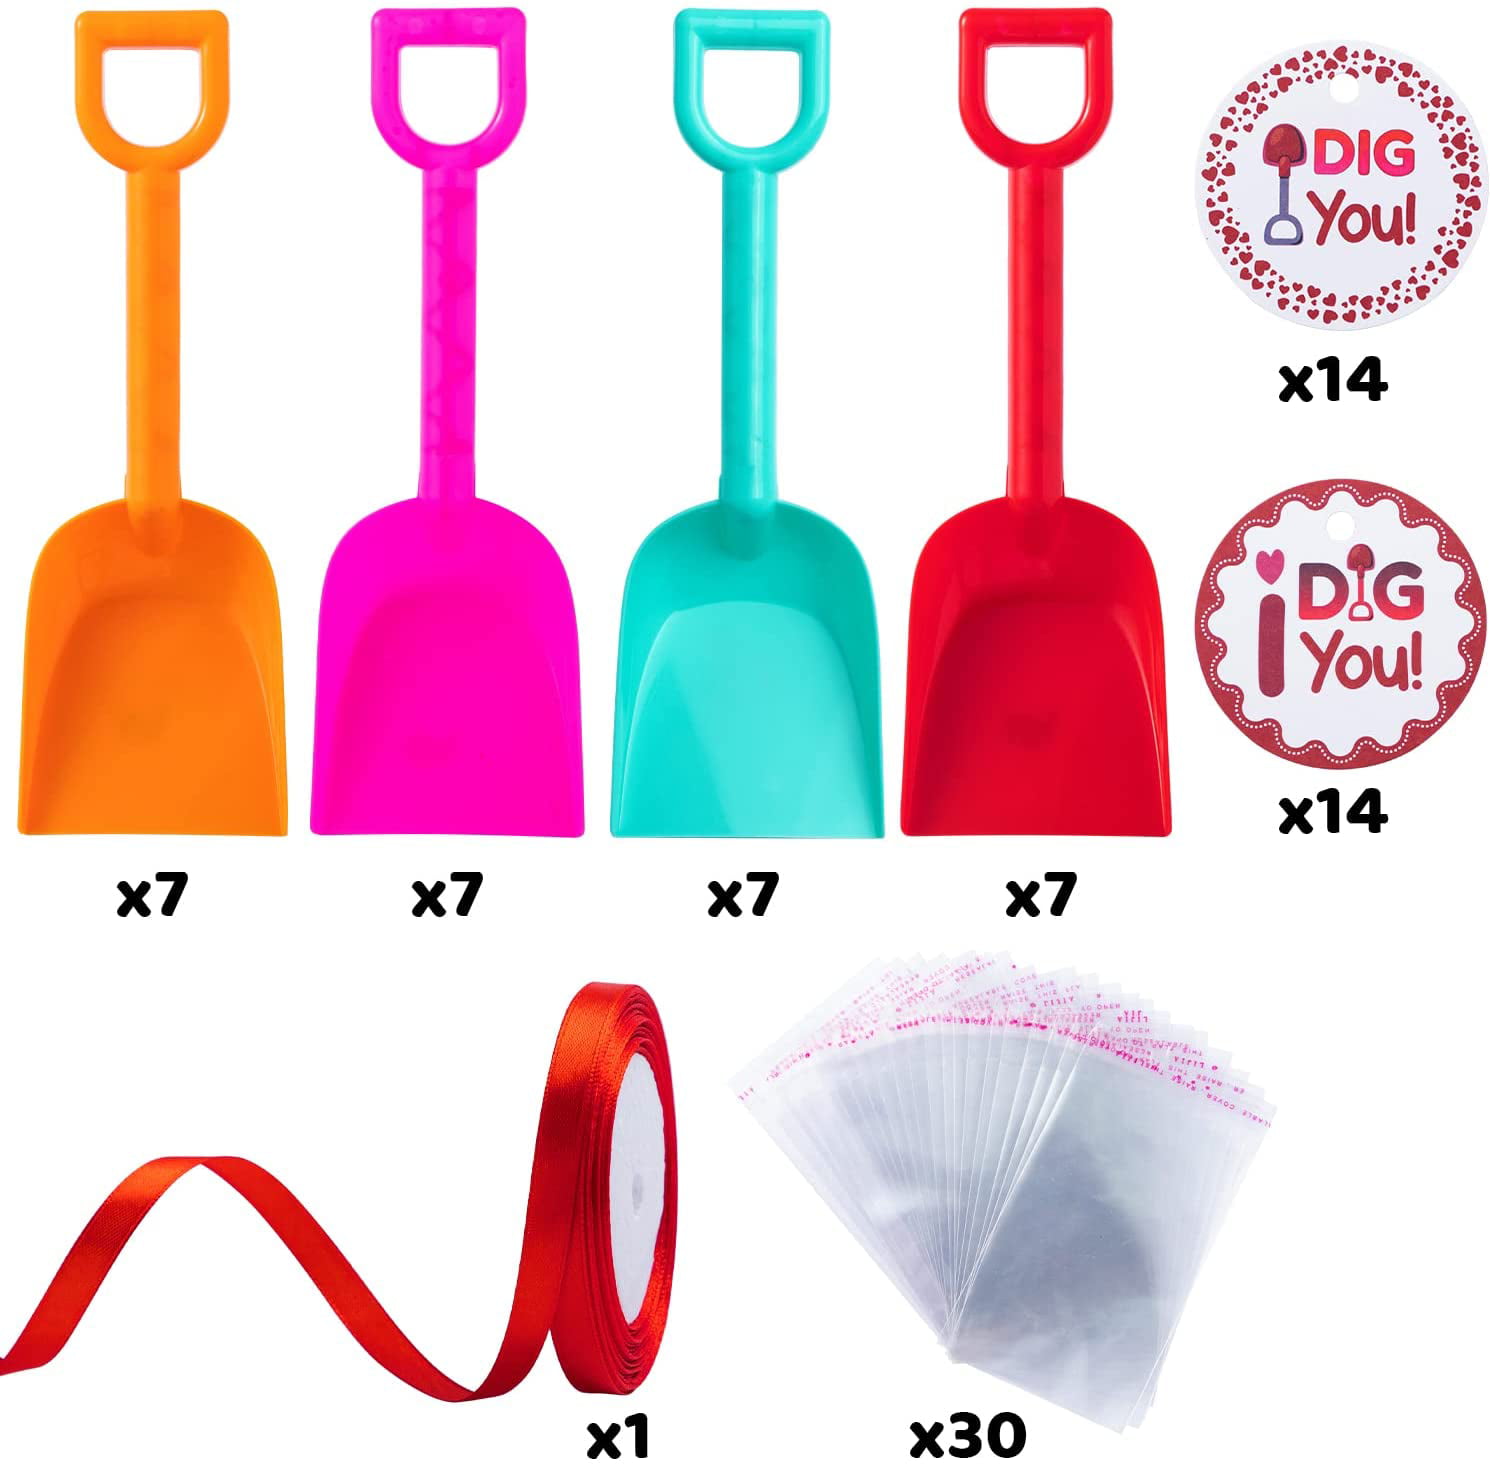 30 Valentine's Day Toy Shovels 30 I Dig you Stickers Cello Bags 60 Strips Ribbon 